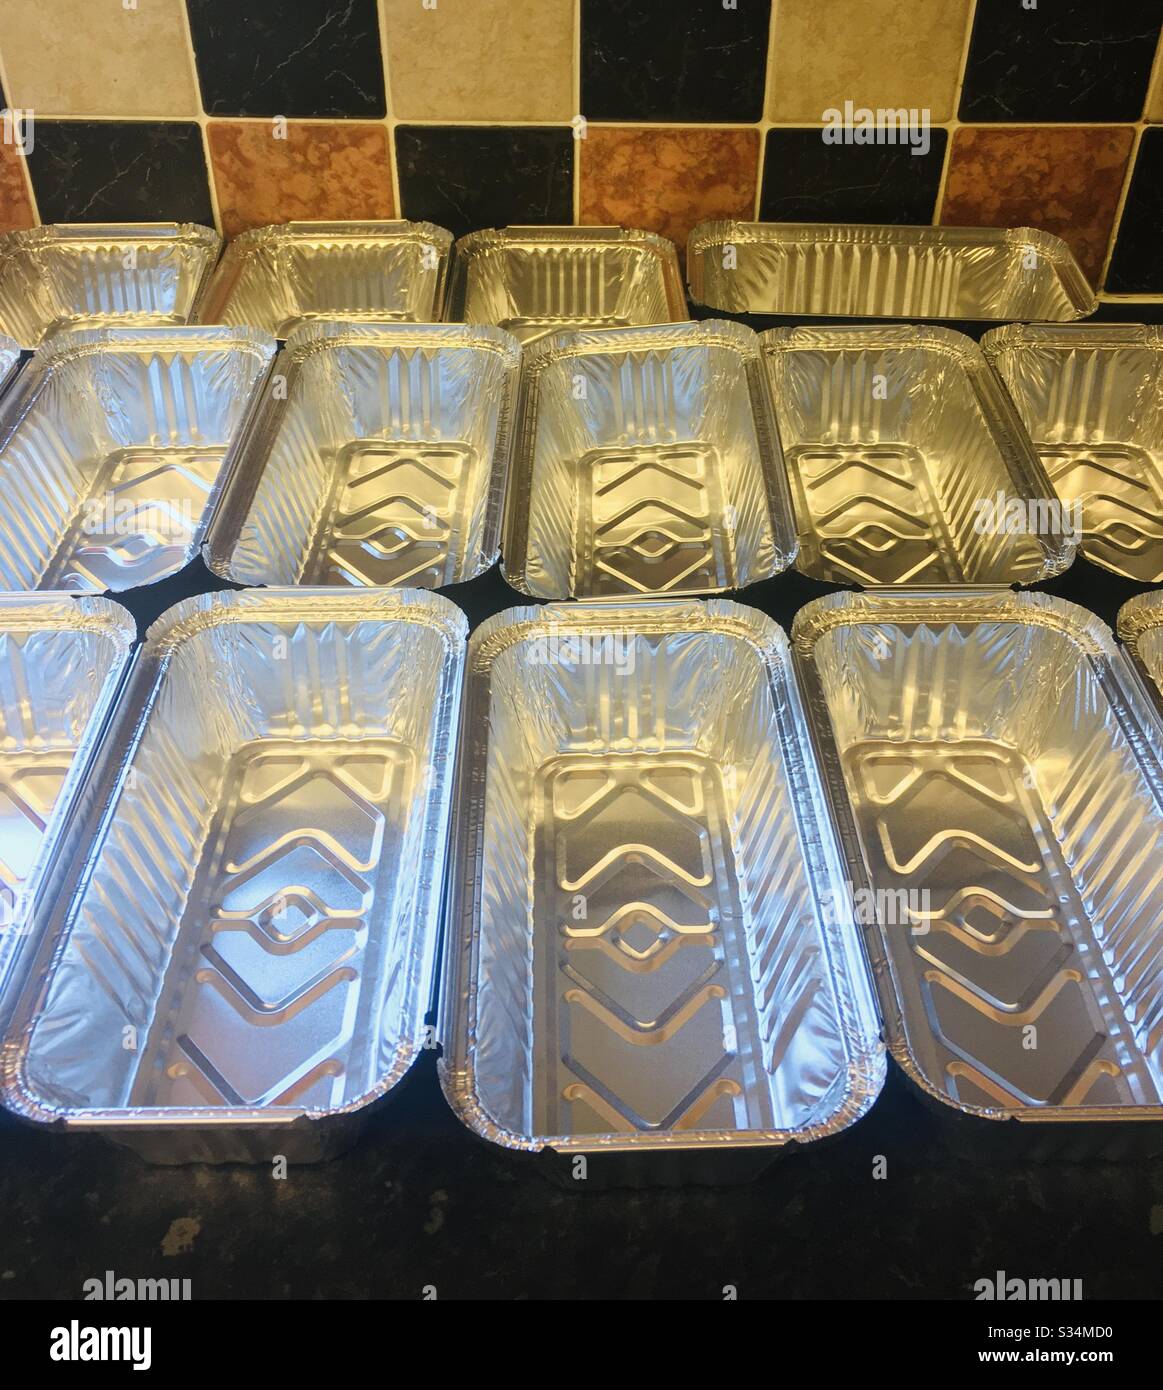 Foil containers ready for food to be stored - stockpiling food for delivery Stock Photo